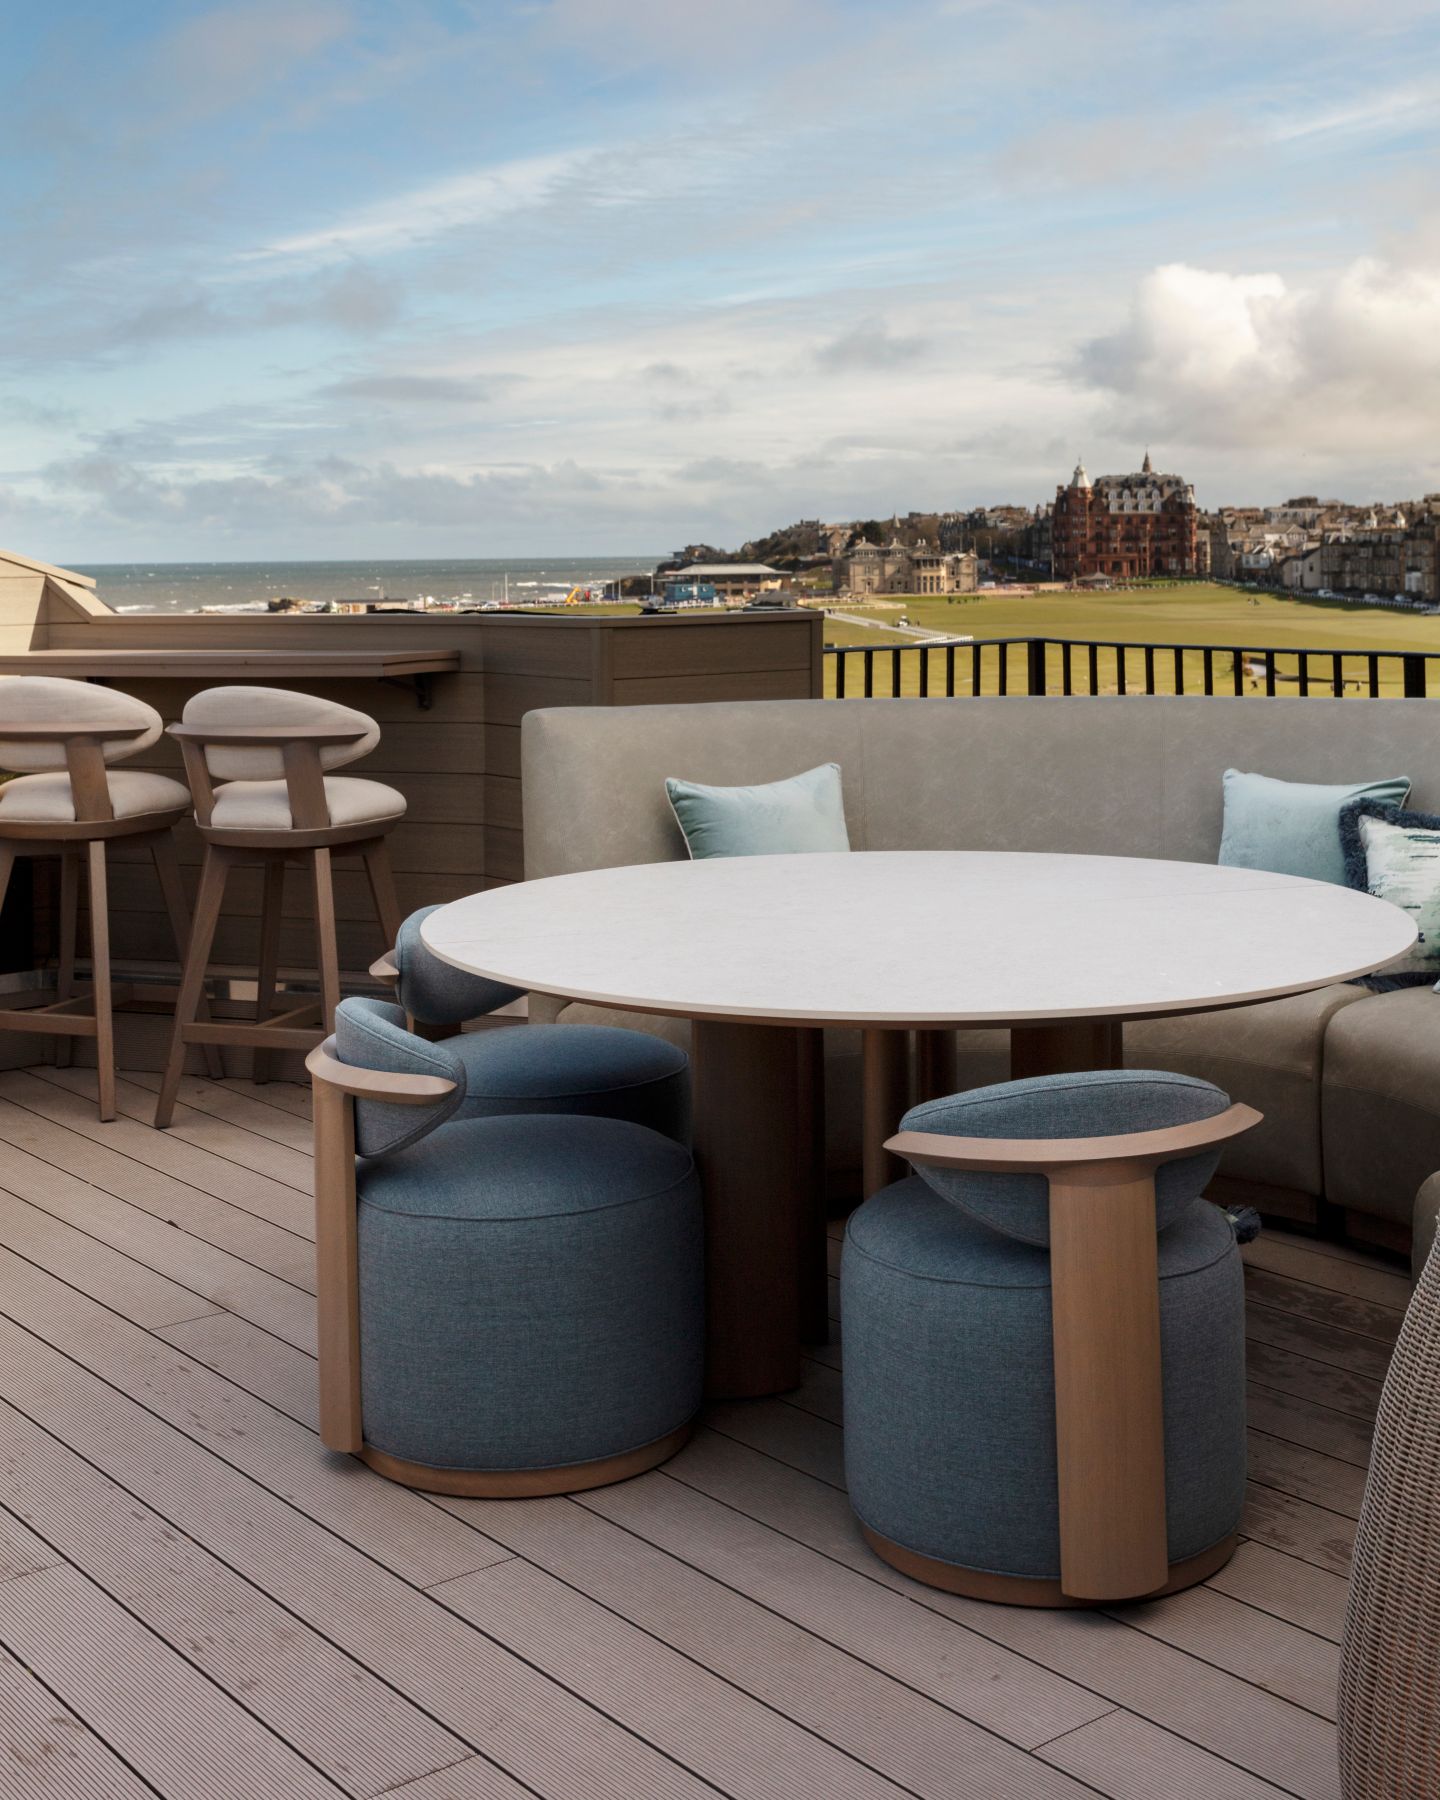 Dining on the West Deck, St Andrews